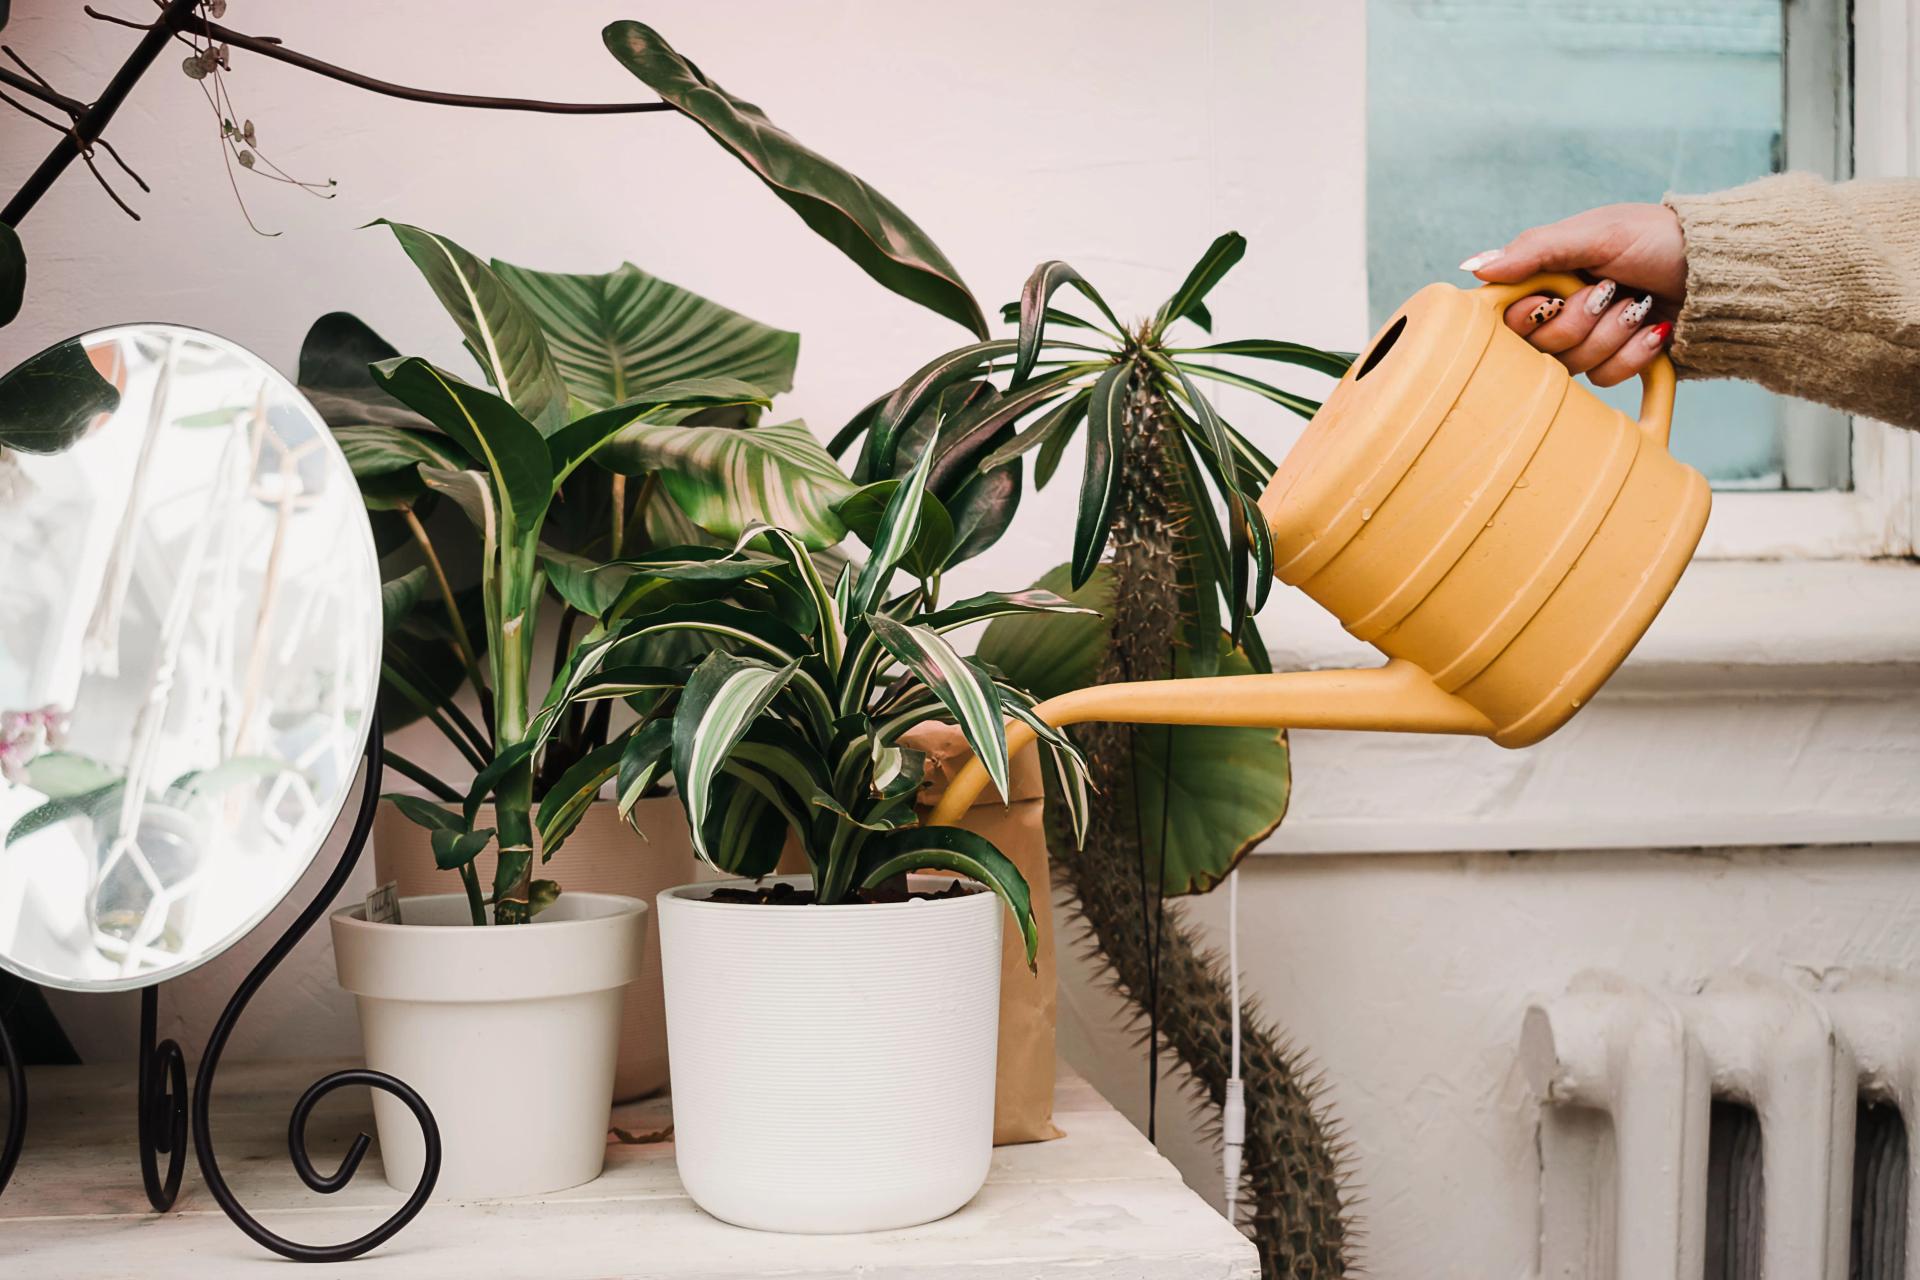 Watering Houseplants with Watering Pot